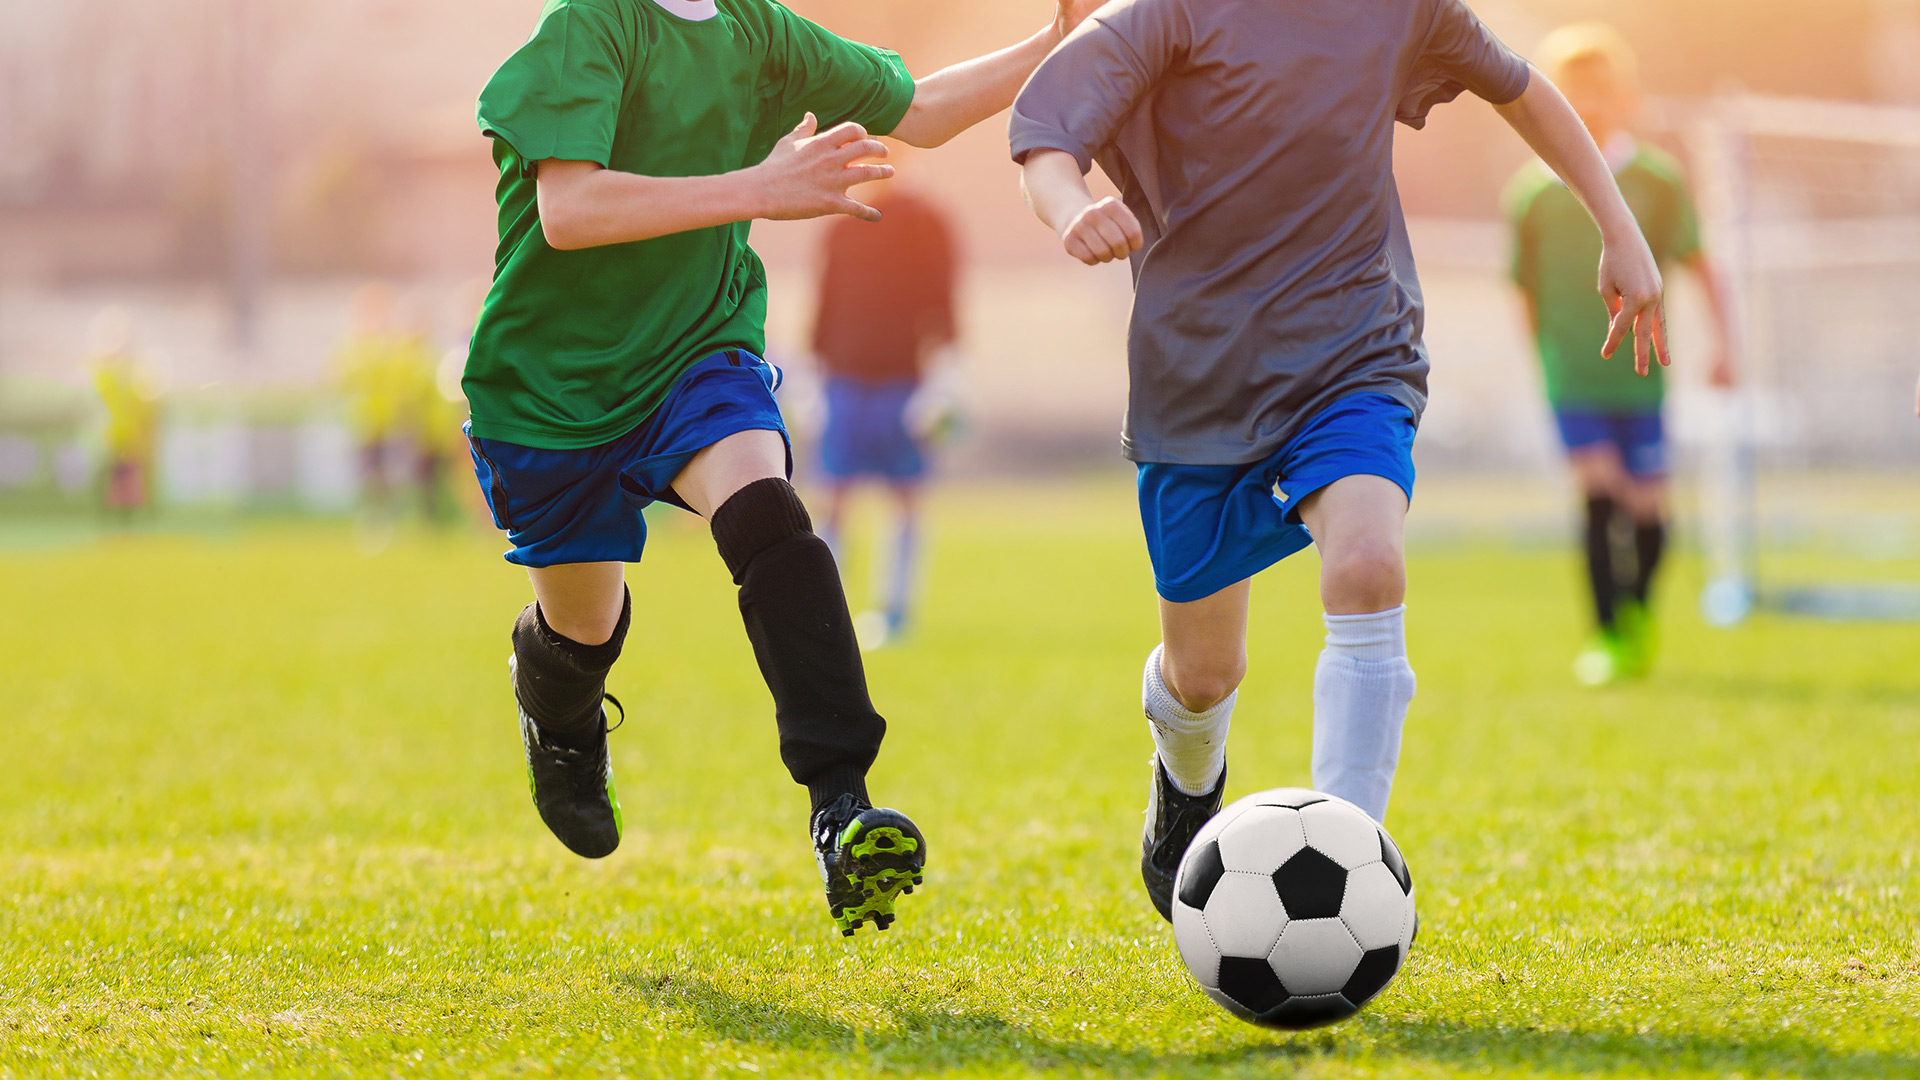 With the lifting of COVID-19 restrictions in many areas, lots of kids are getting back into team sports. Here’s what parents and coaches need to know to keep kids healthy, safe, and active. 